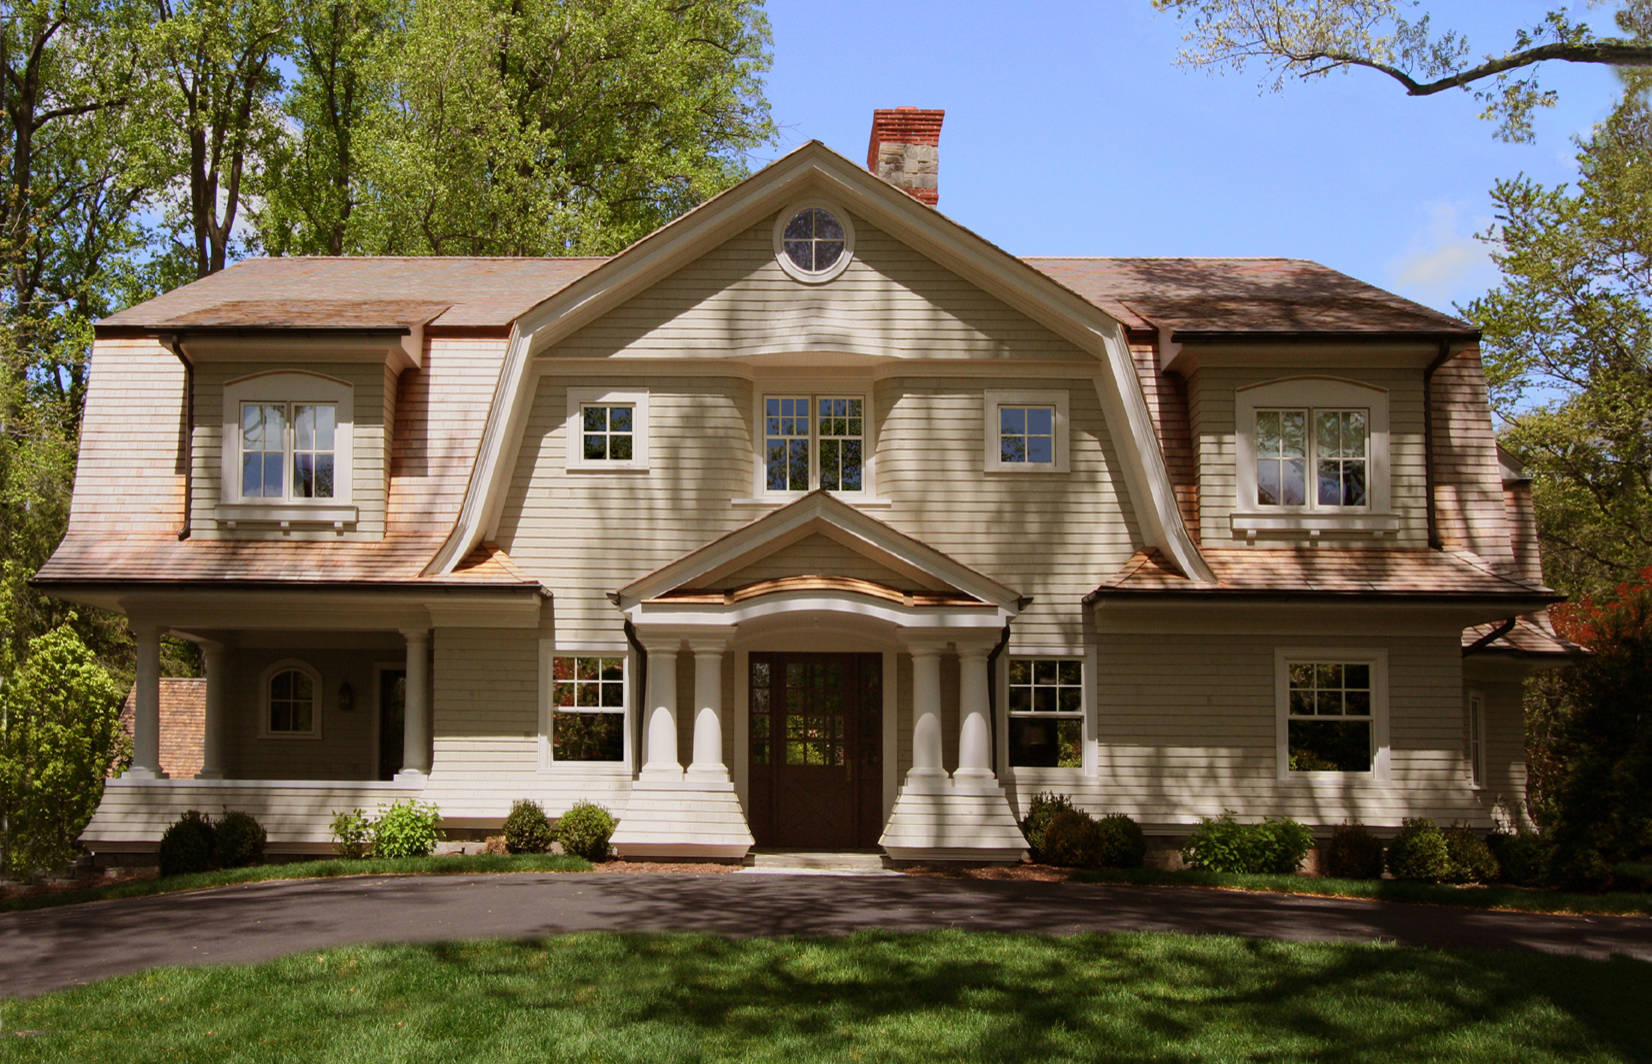 shingle style private residence